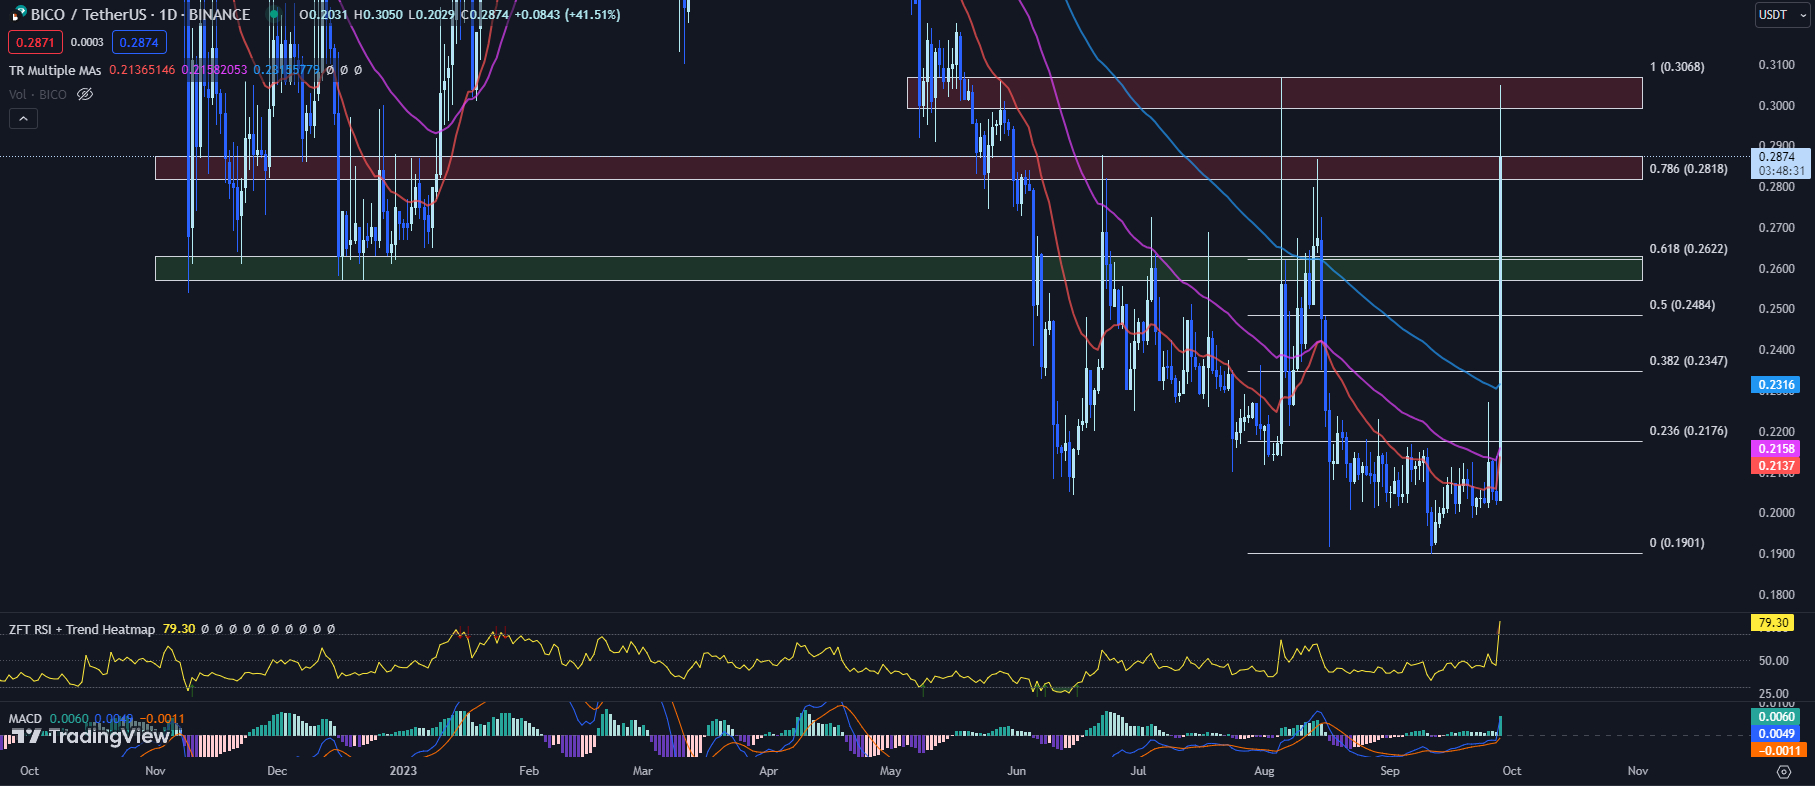 TradingView chart for the BICO price 09-28-23